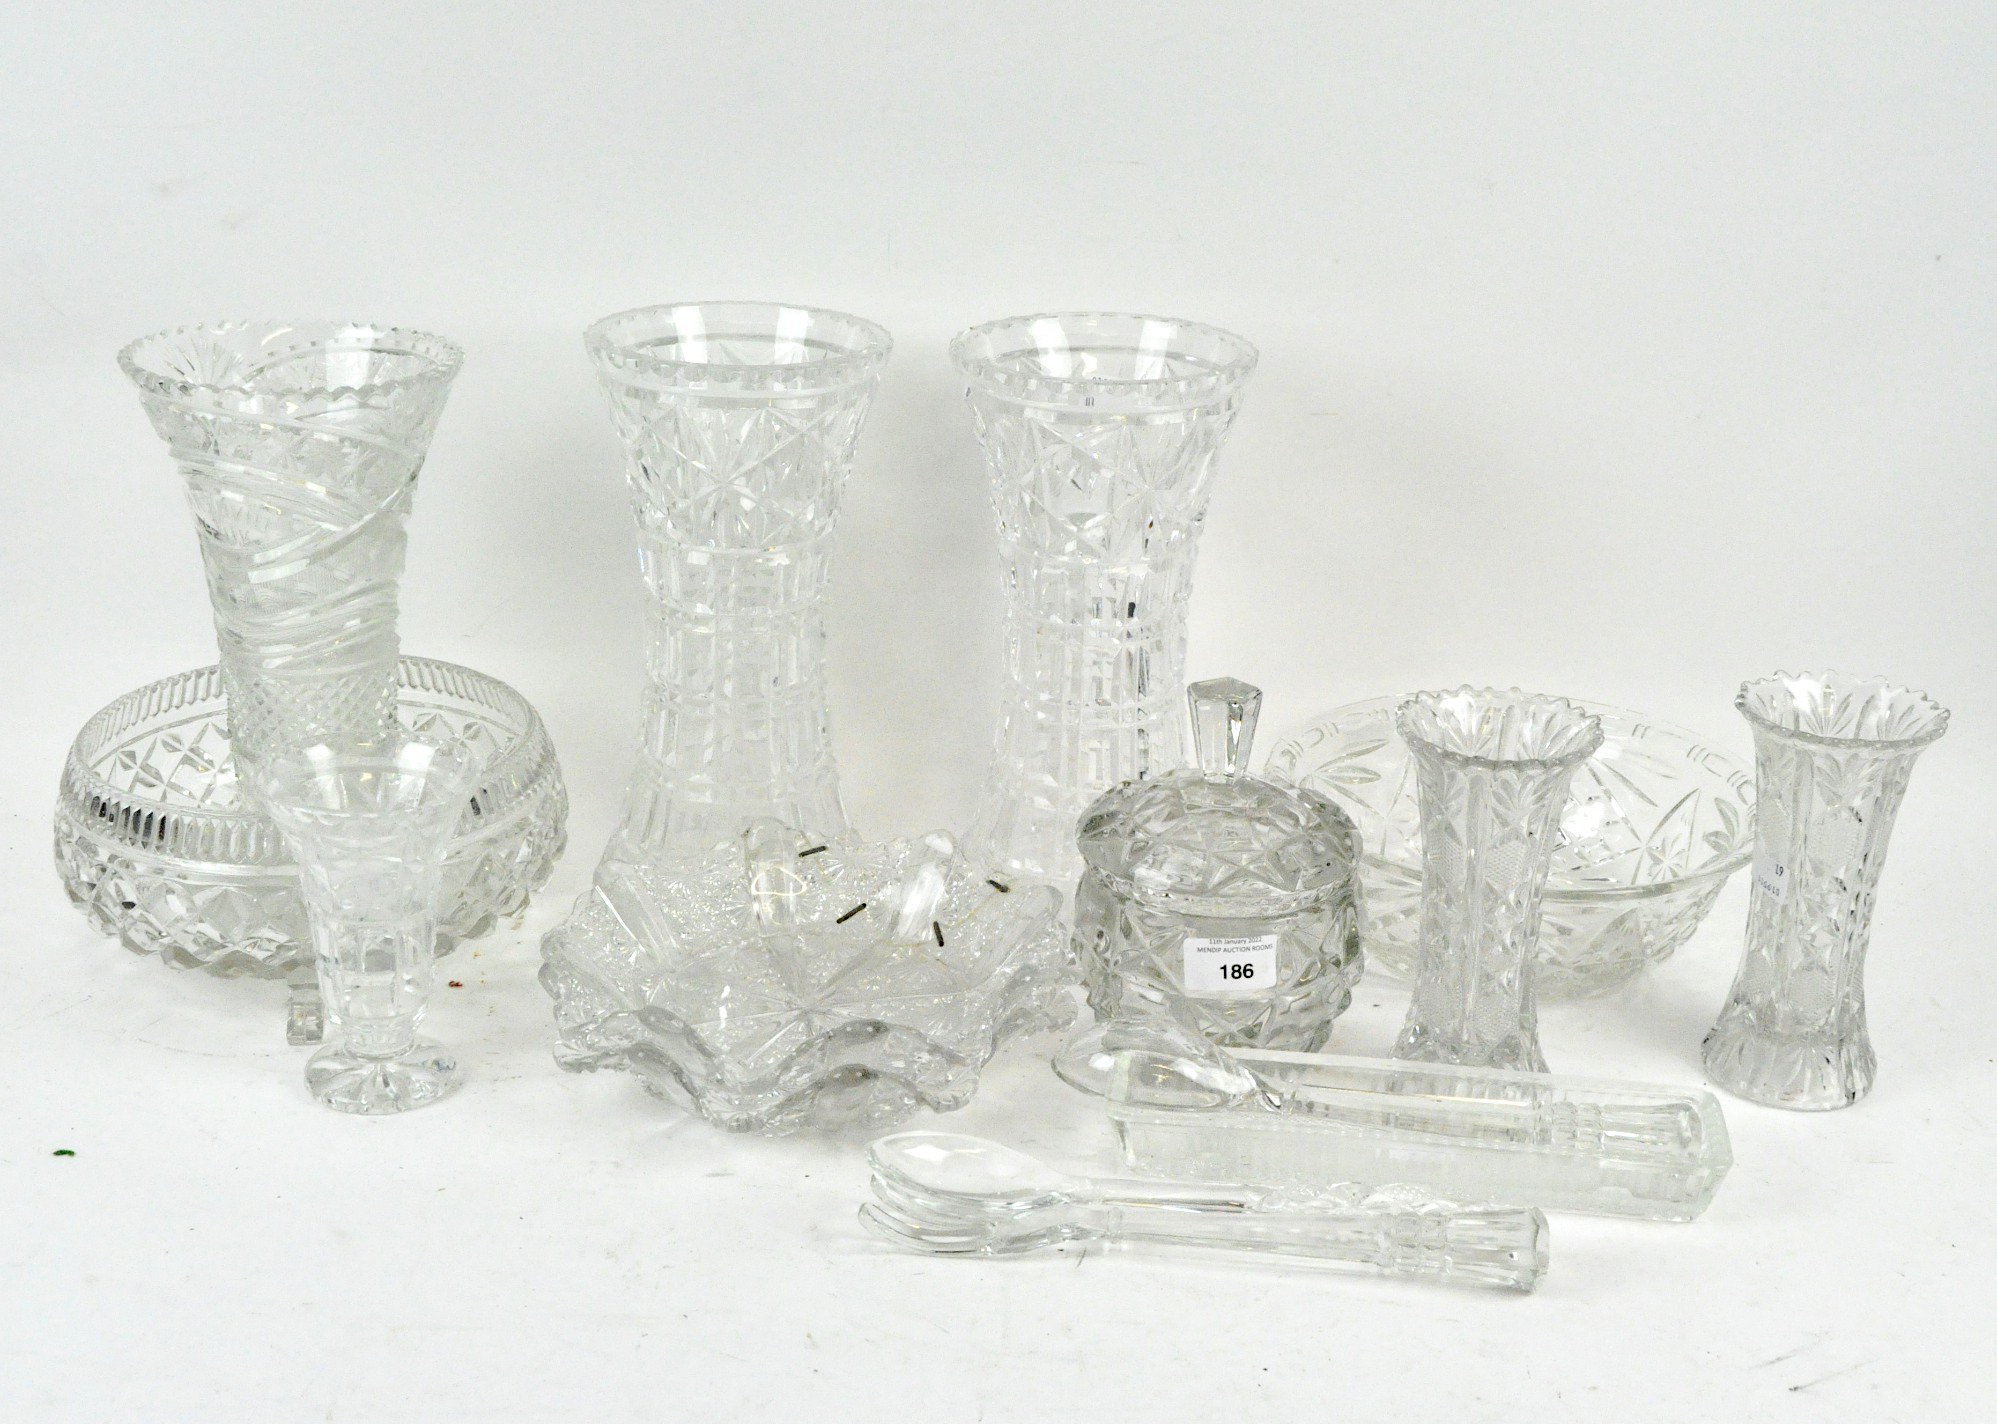 A selection of contemporary glassware, including a salad bowl and servers, fluted dishes,